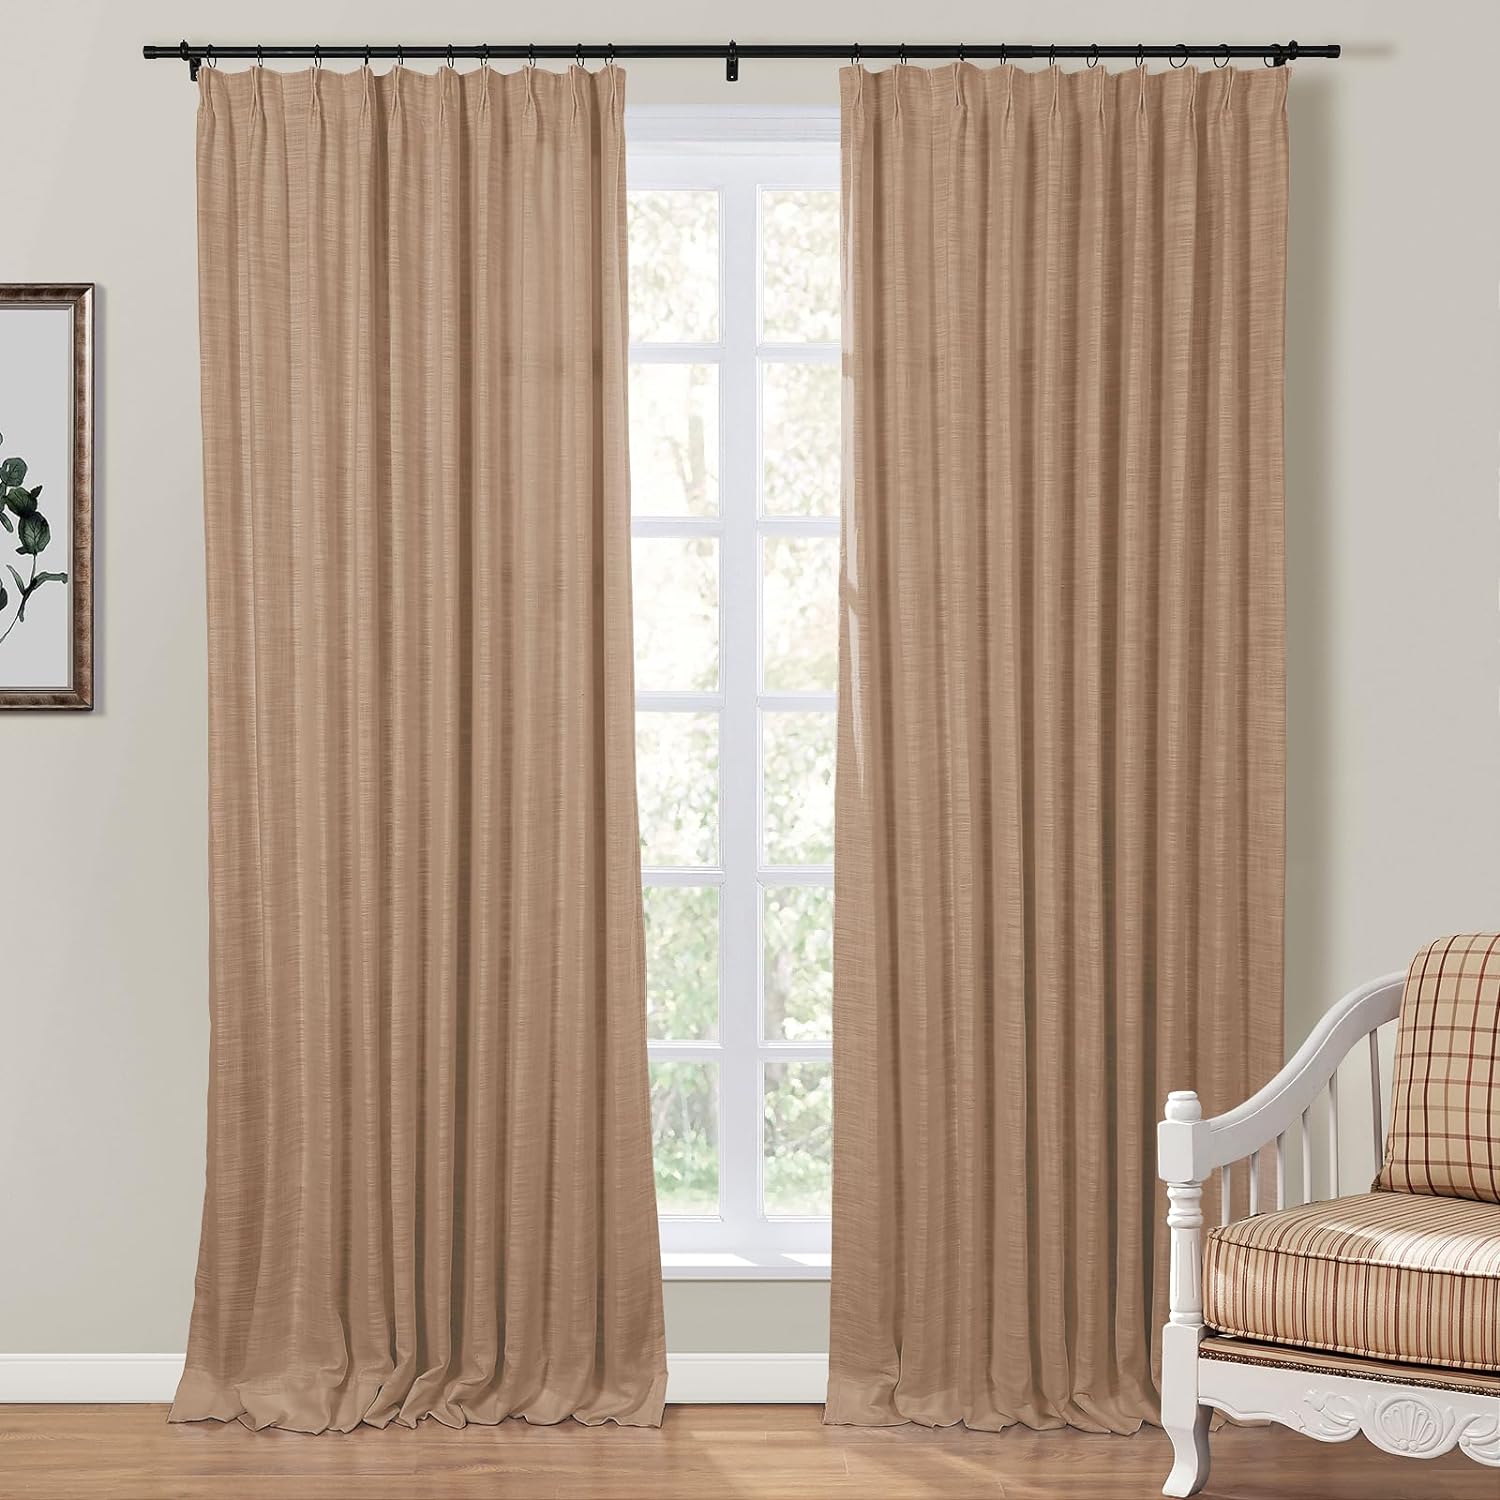 TwoPages Curtains